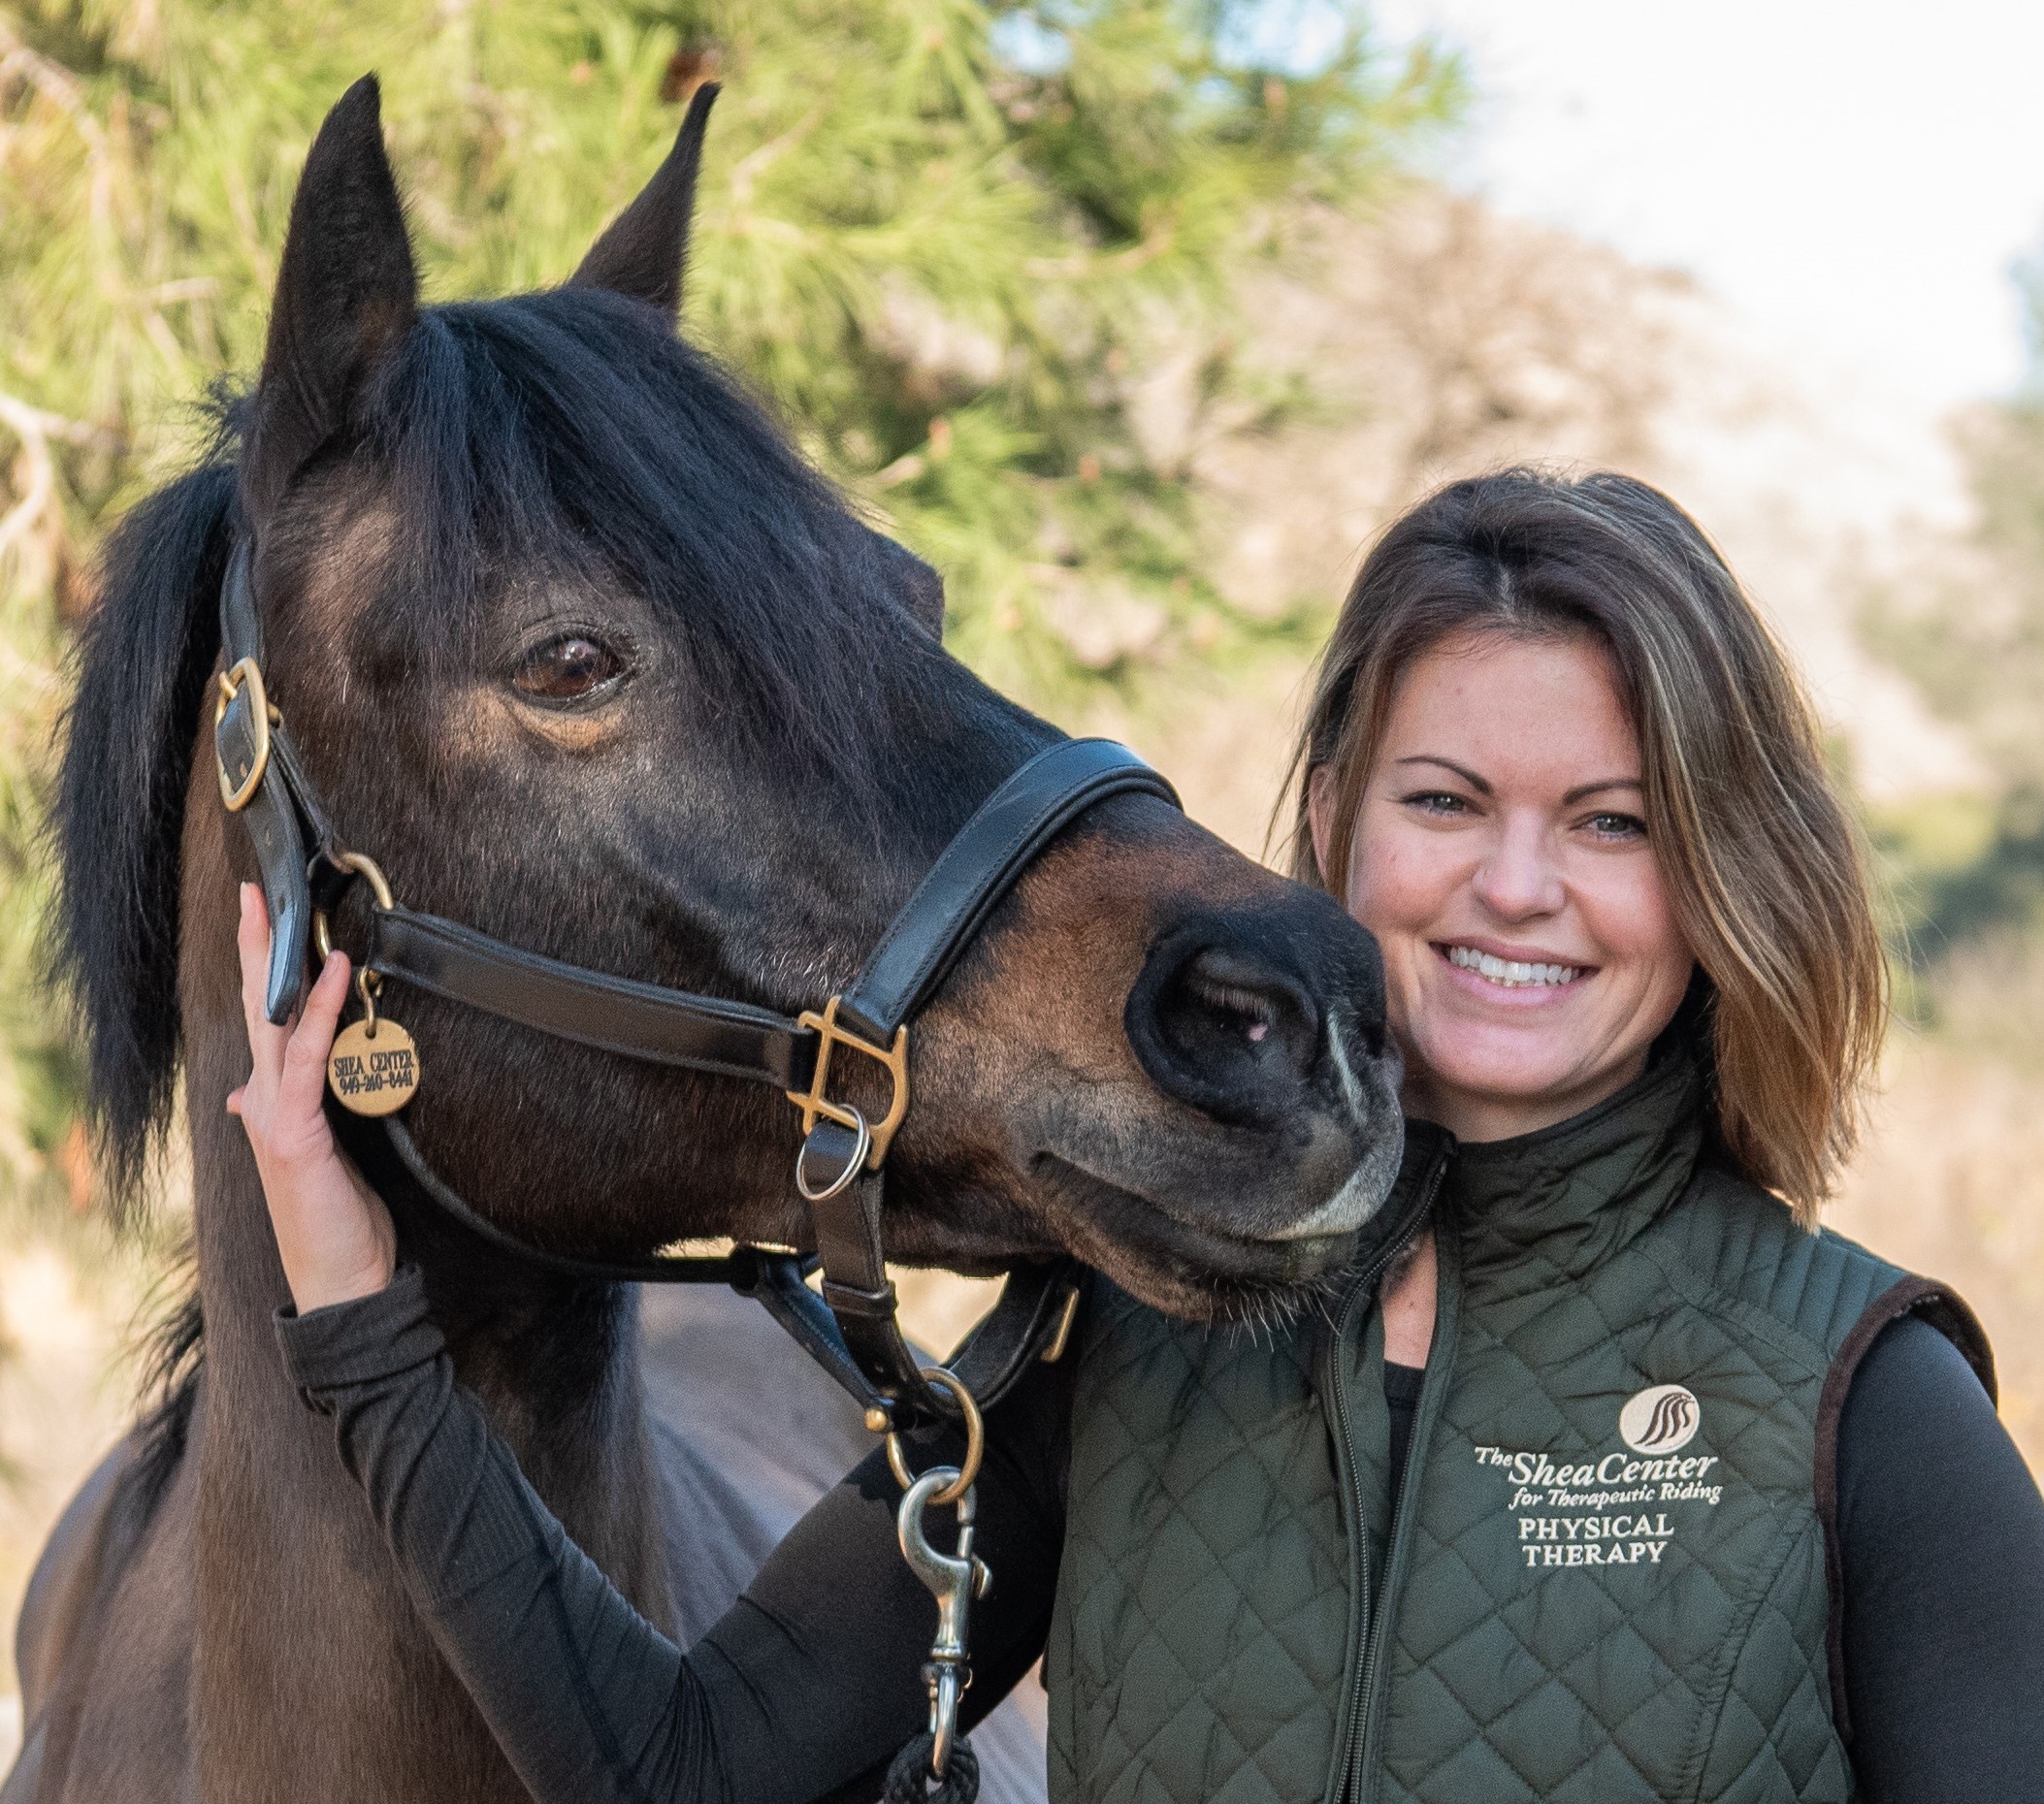 Randi Shannahan, DPT,  The Shea Center for Therapeutic Riding's Therapy Services Manager